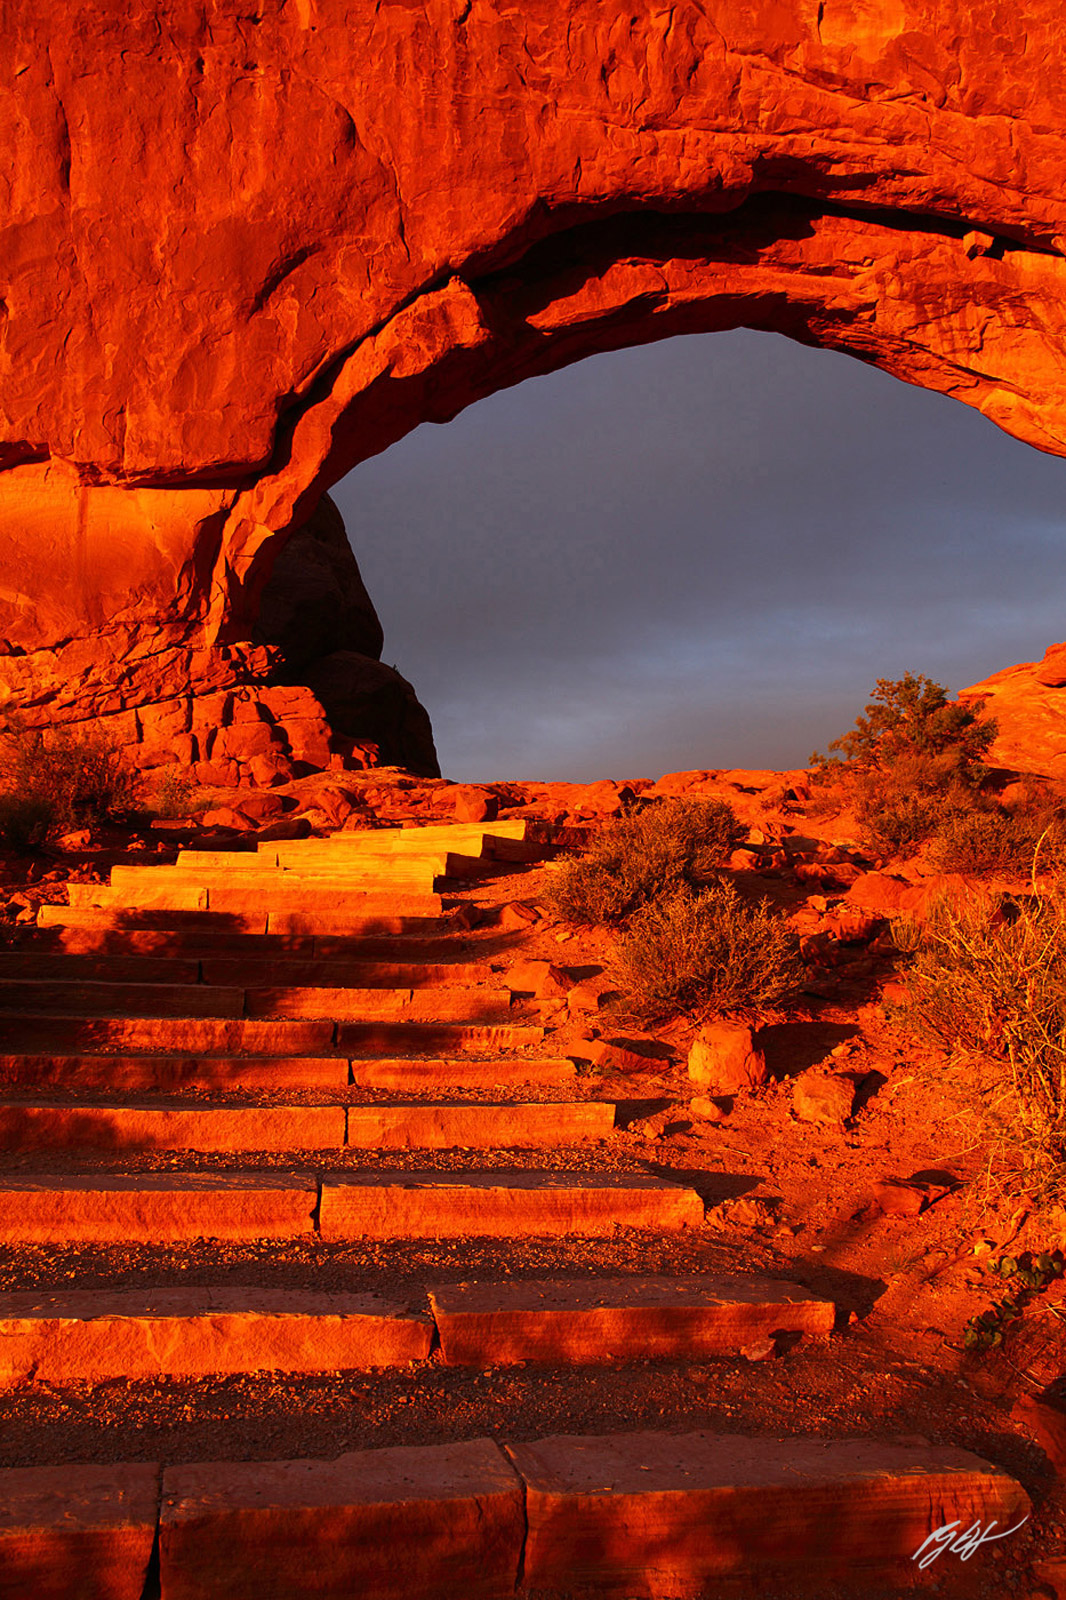 Evening Light on Steps Leading up to the North Window from Arches National Park in Utah